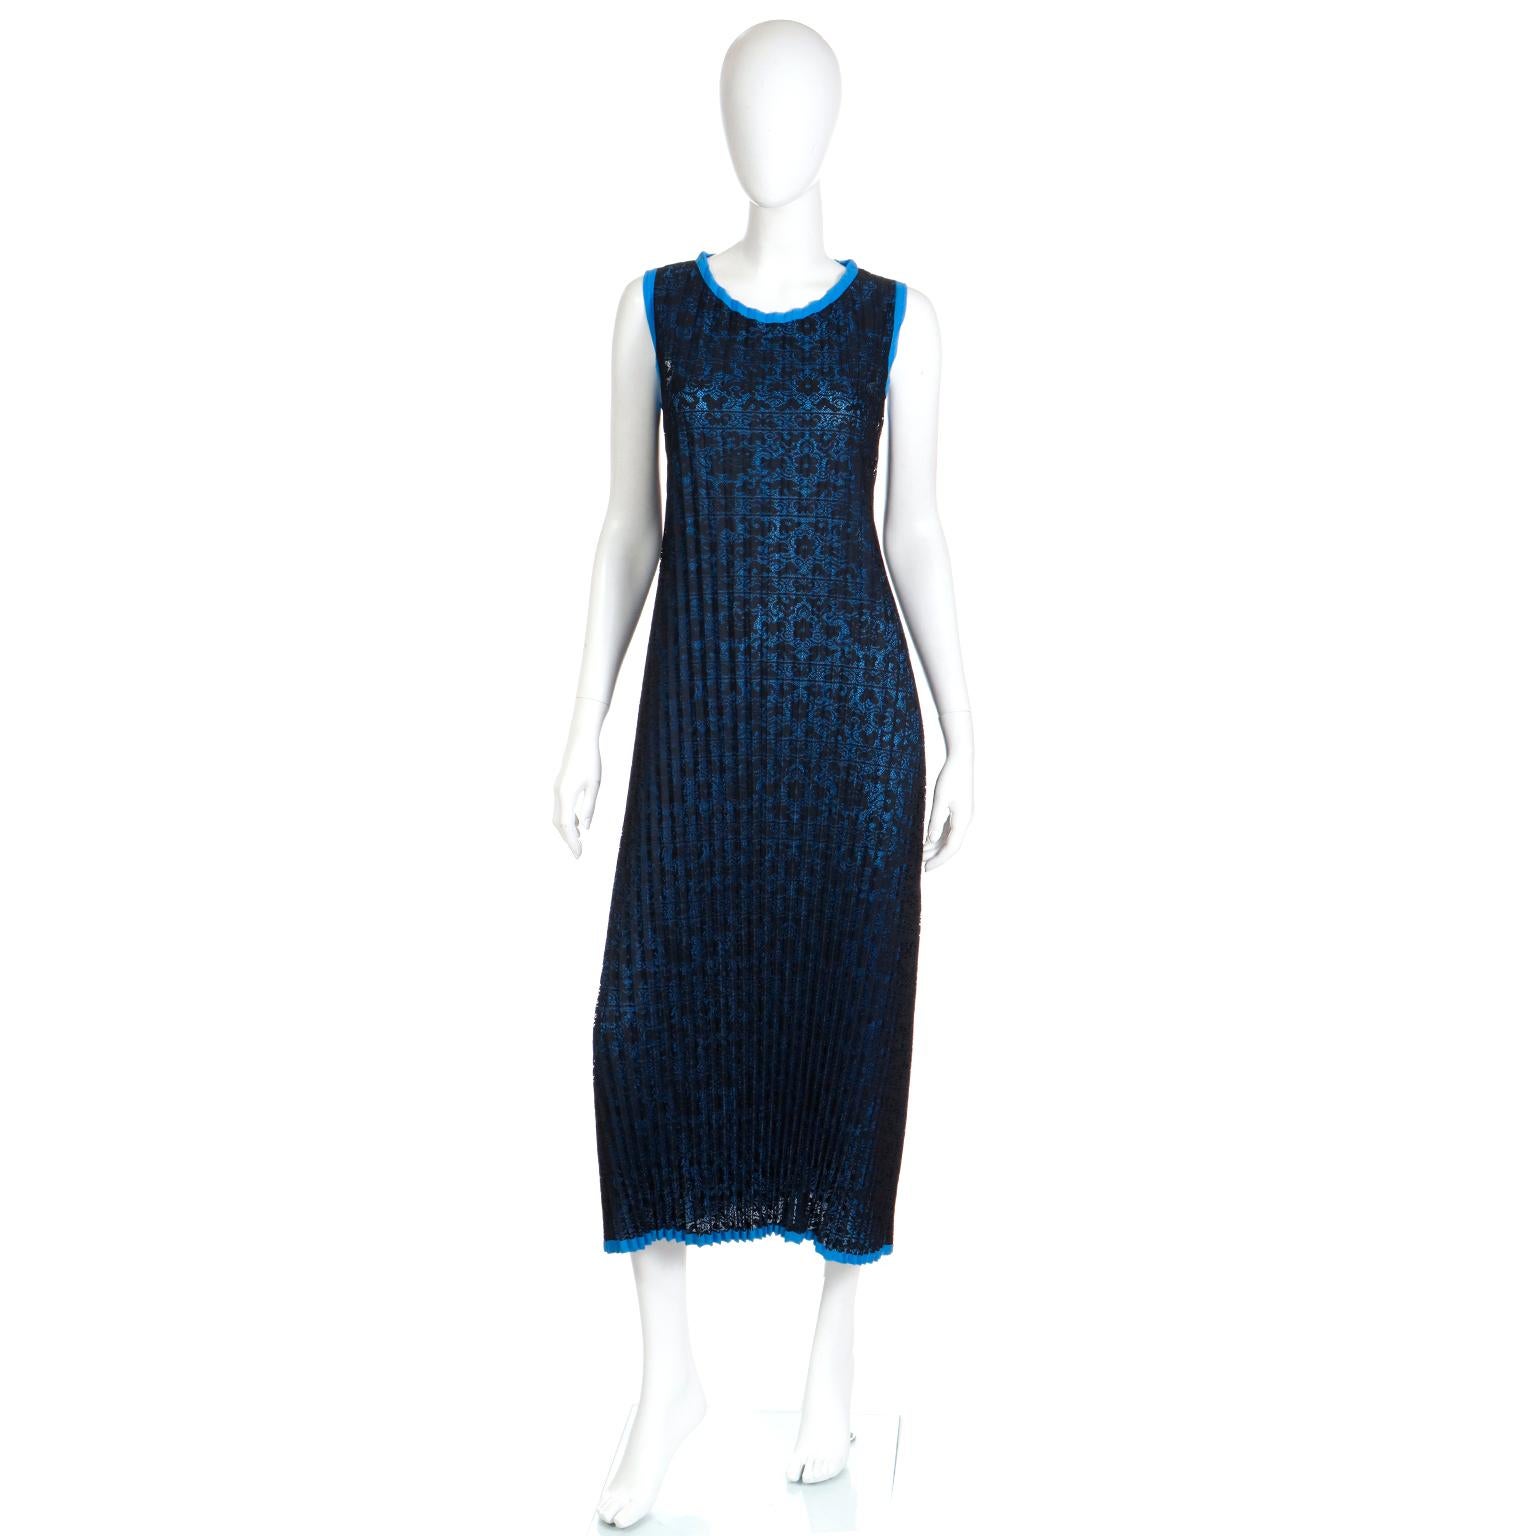 This vintage Issey Miyake full length pleated black lace dress is over a bright blue with the same blue trim on the hem, arm holes and neckline. We acquired this dress from an Issey Miyake collector who lived in Japan for many years. This particular